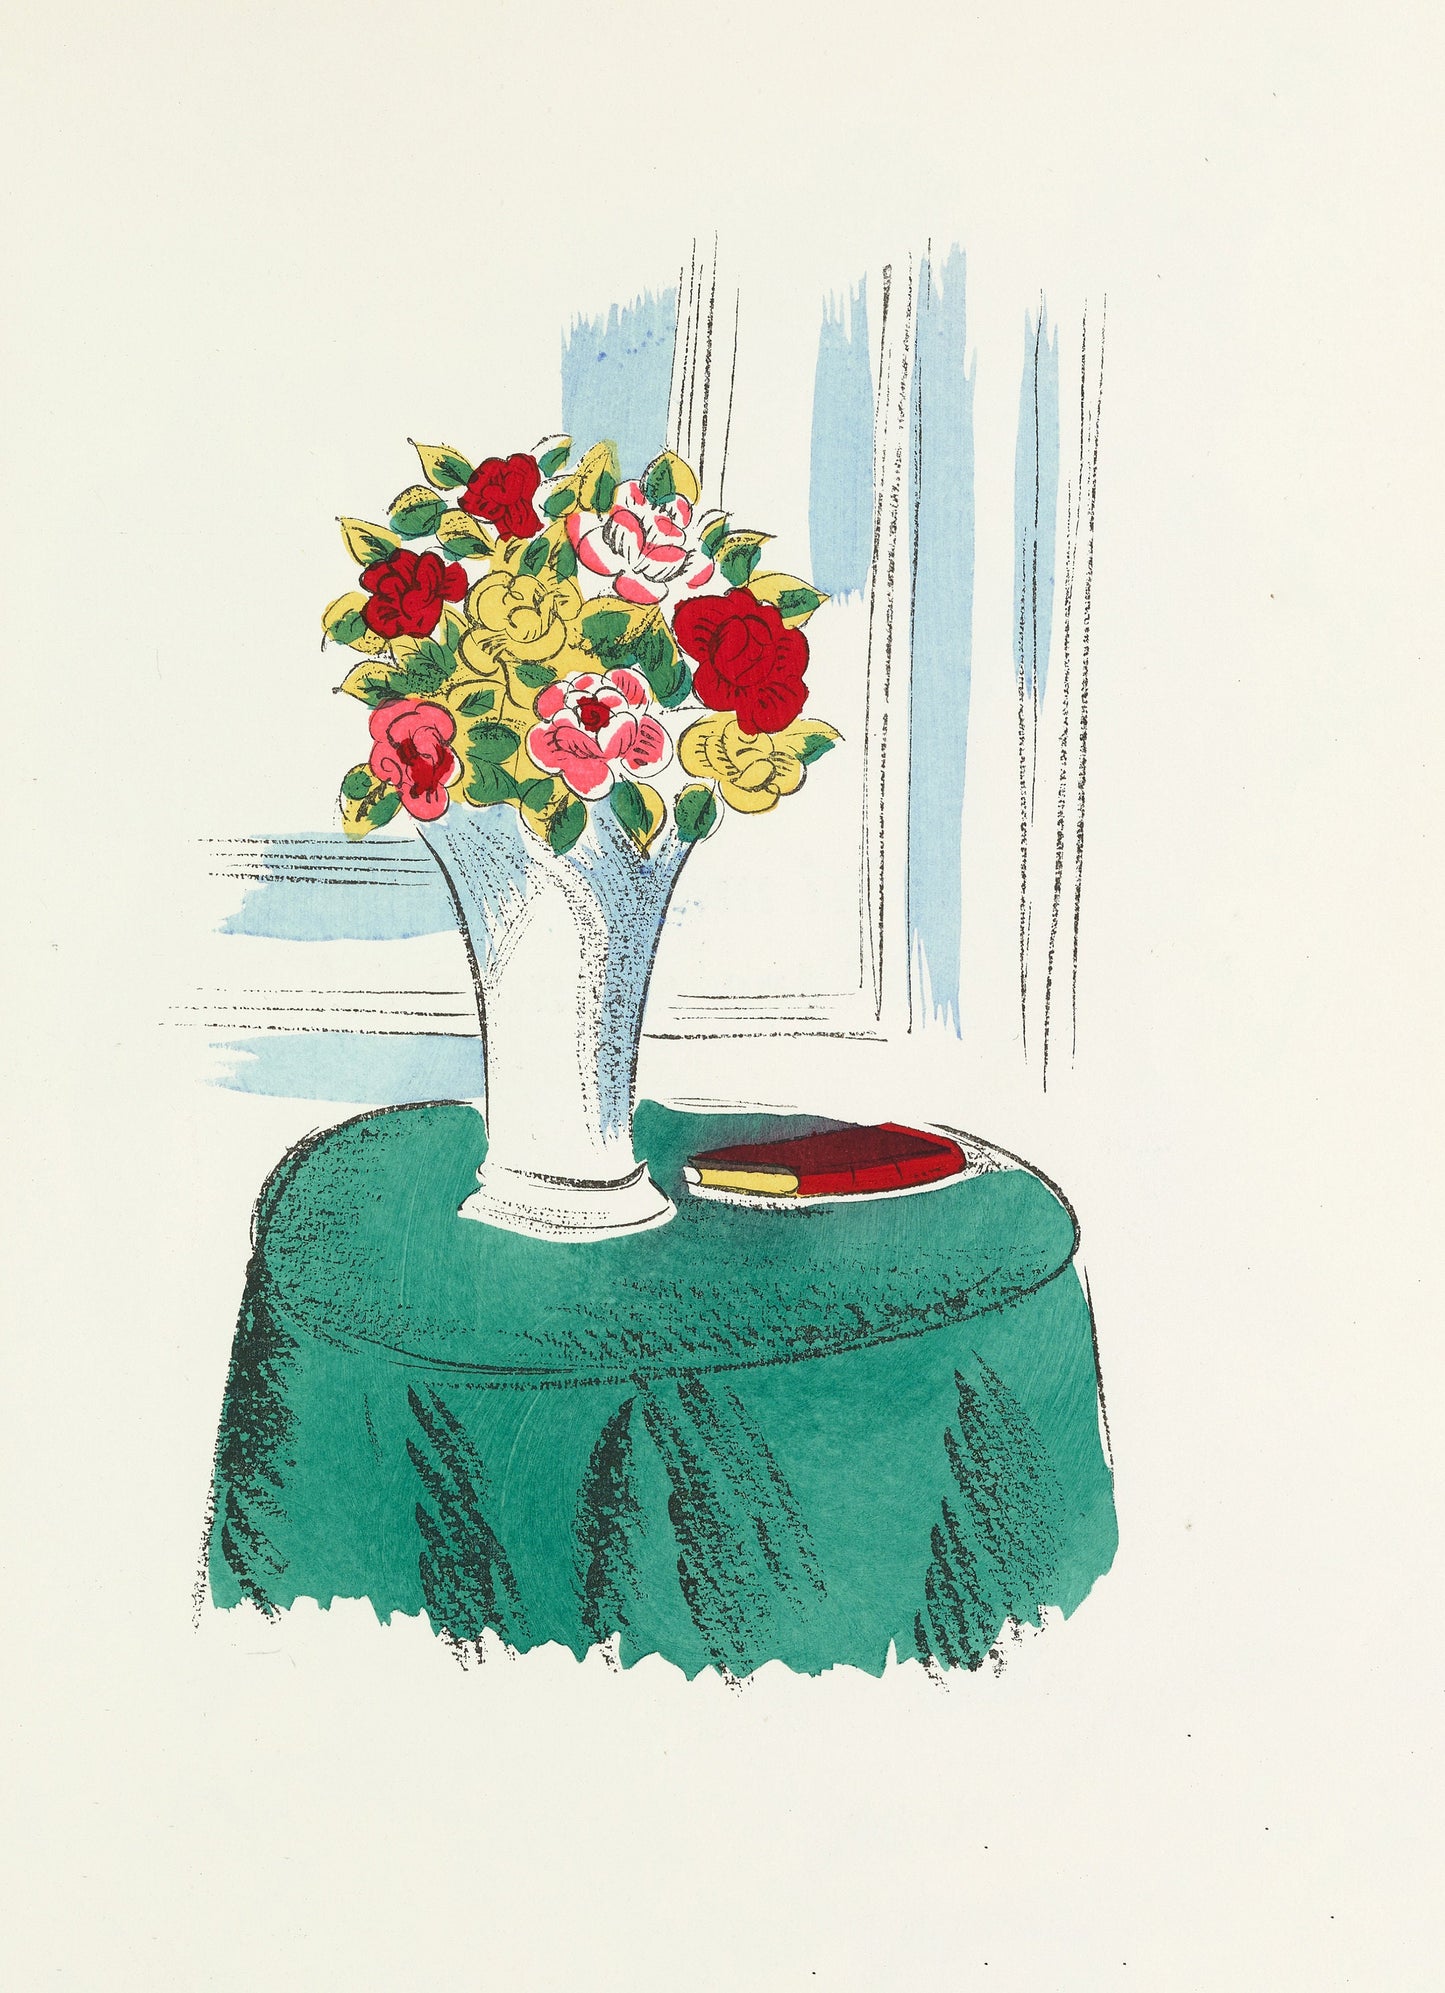 Raoul Dufy Madrigaux Artworks [25 Images]